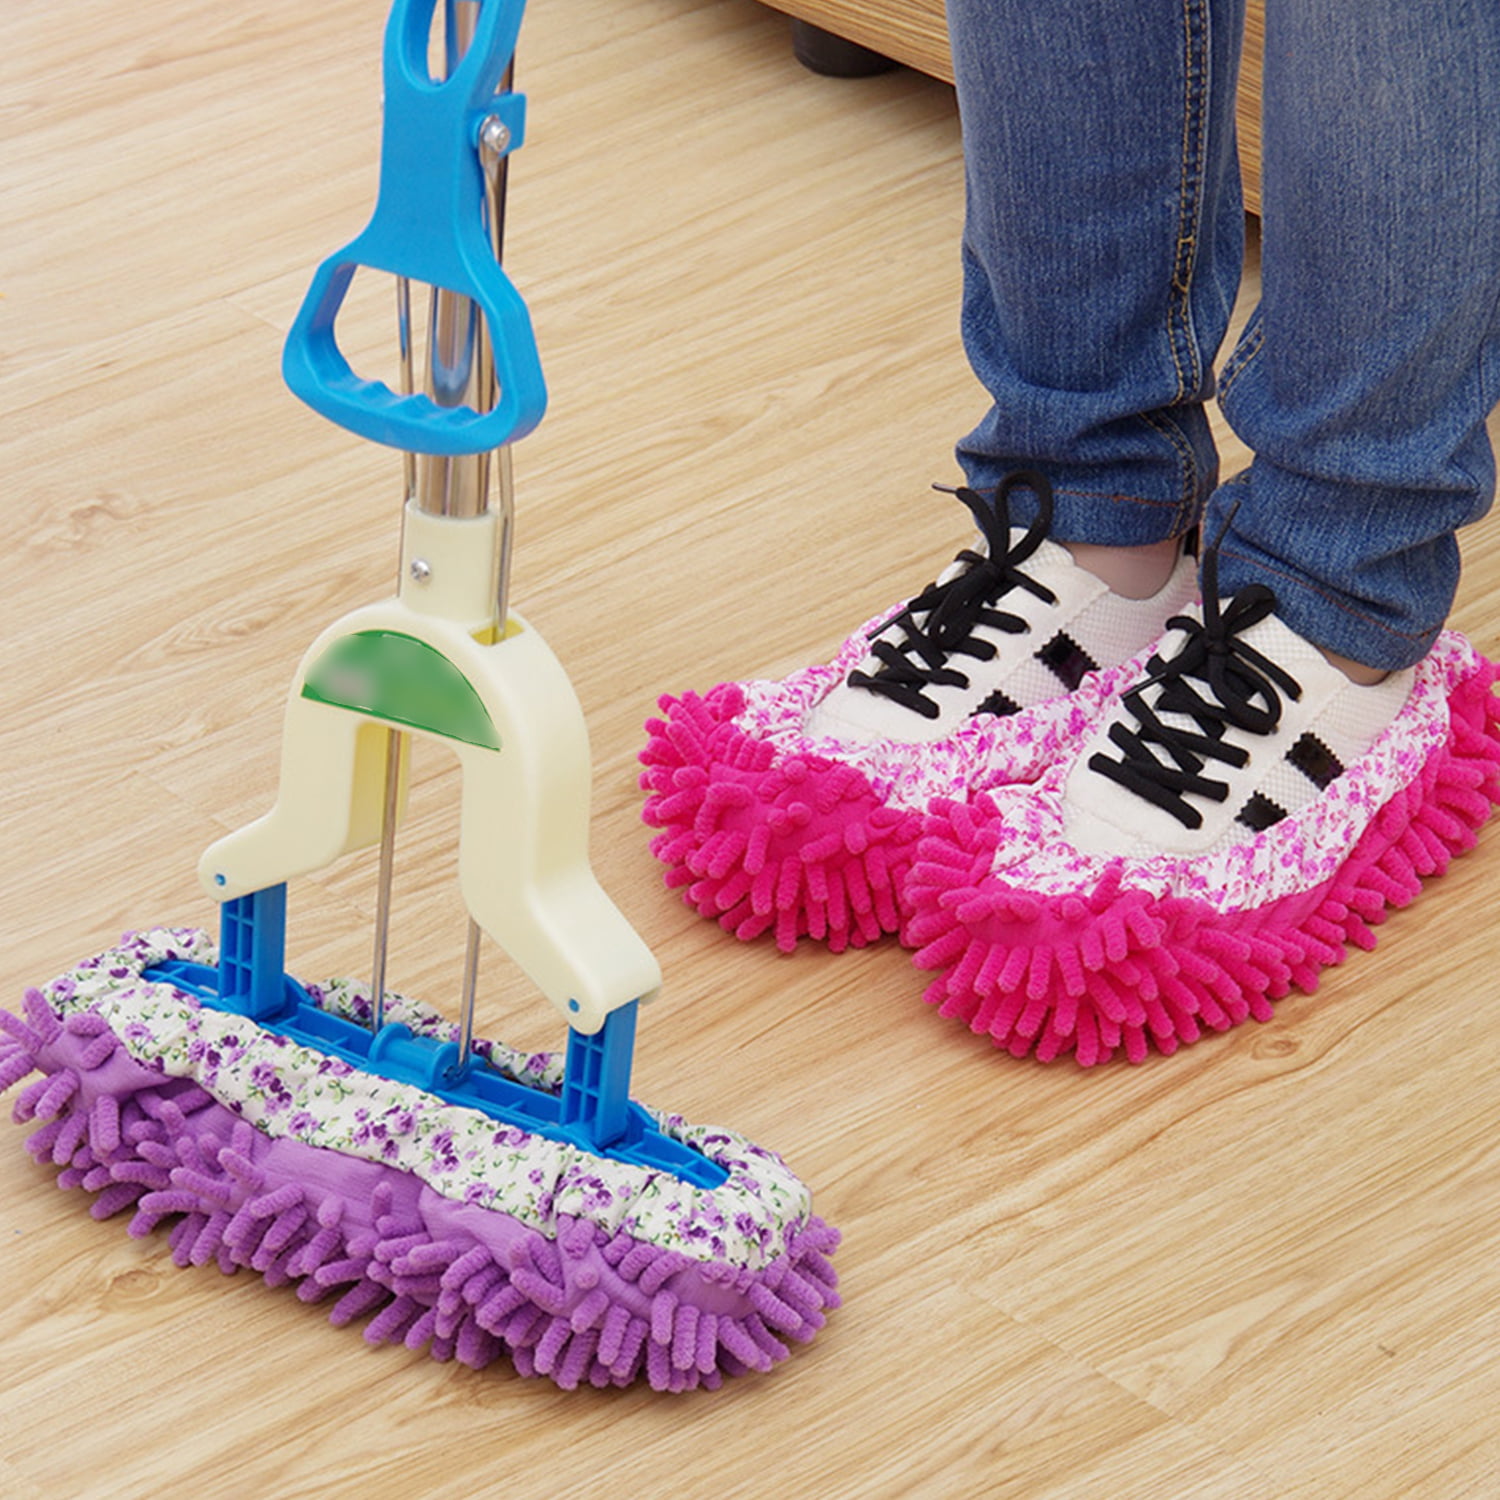 Moppy Slippers Chenille Shoes Cover Multi-Functional Dust Duster Mop I3P4 